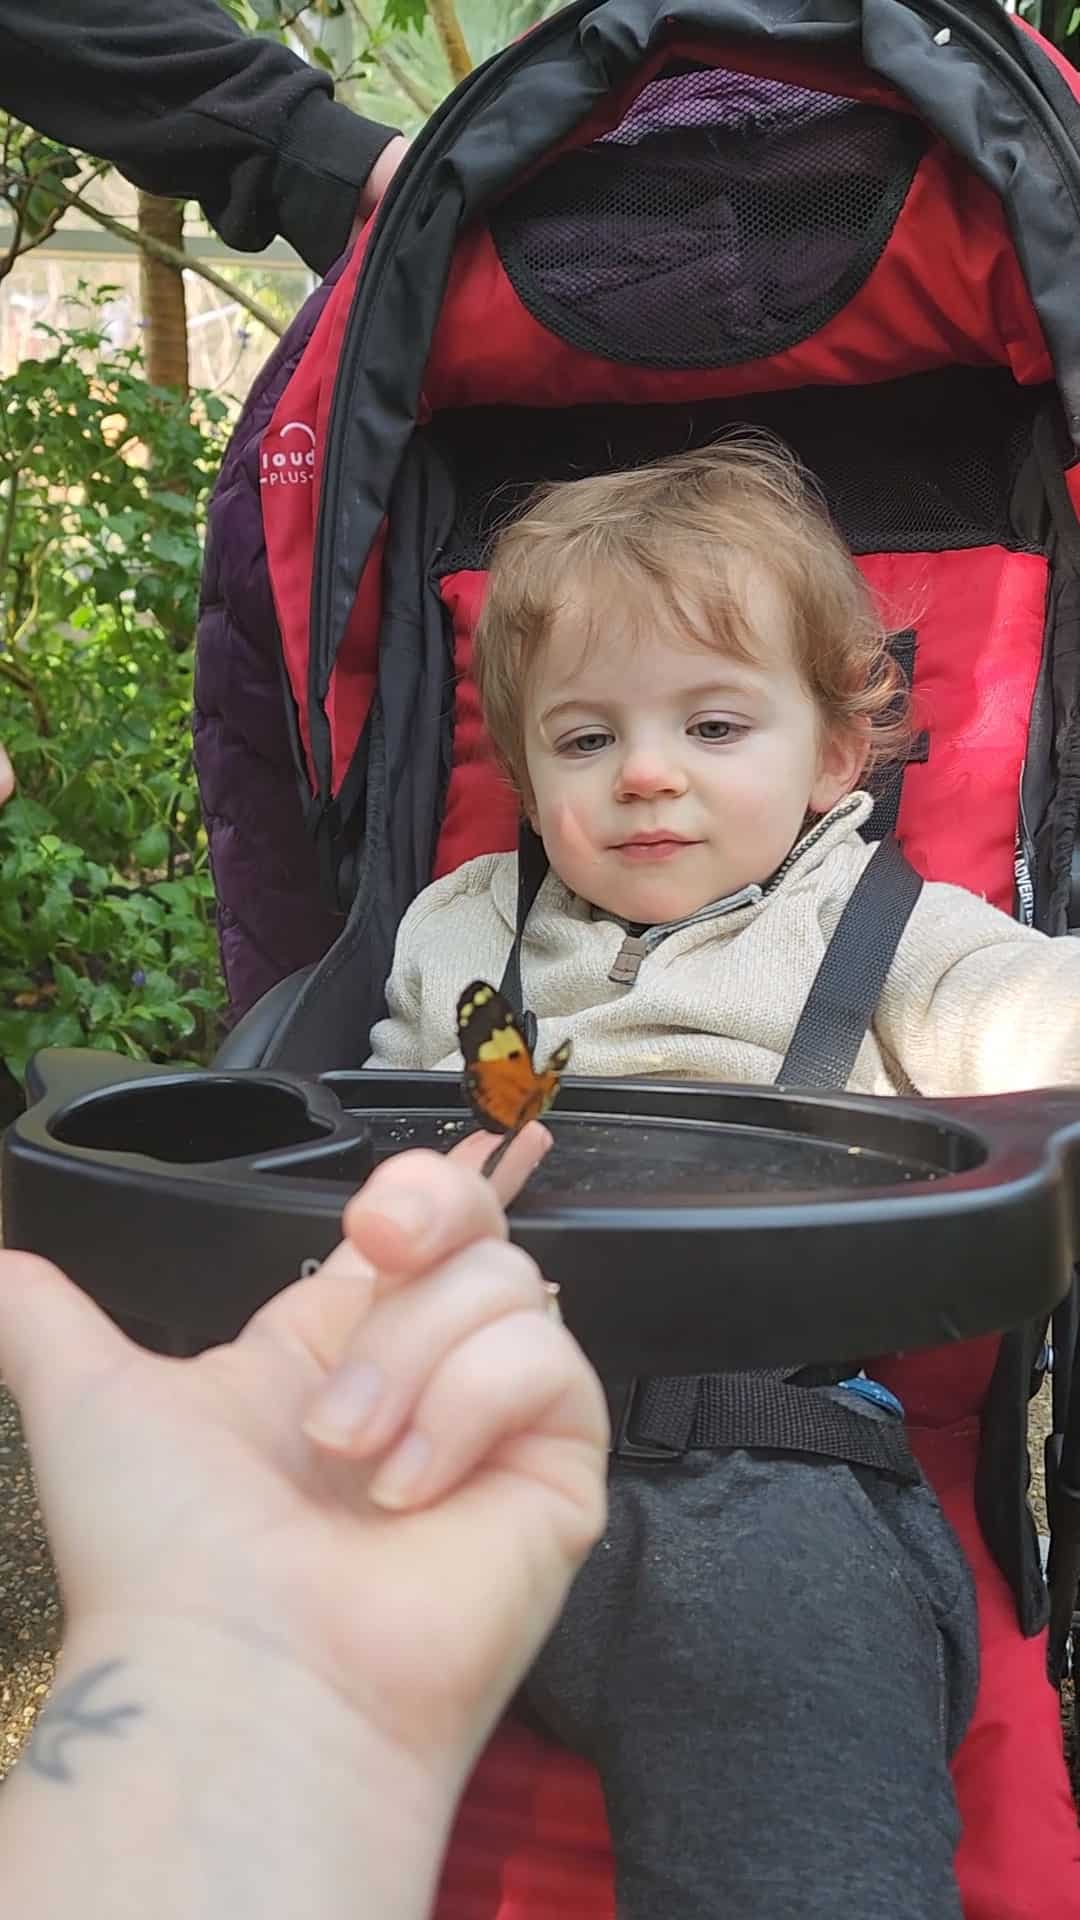 A toddler gazes curiously at a delicate butterfly perched on a visitor's hand in the Museum of Life and Science Butterfly House in Durham, NC, highlighting a magical moment of interaction with nature